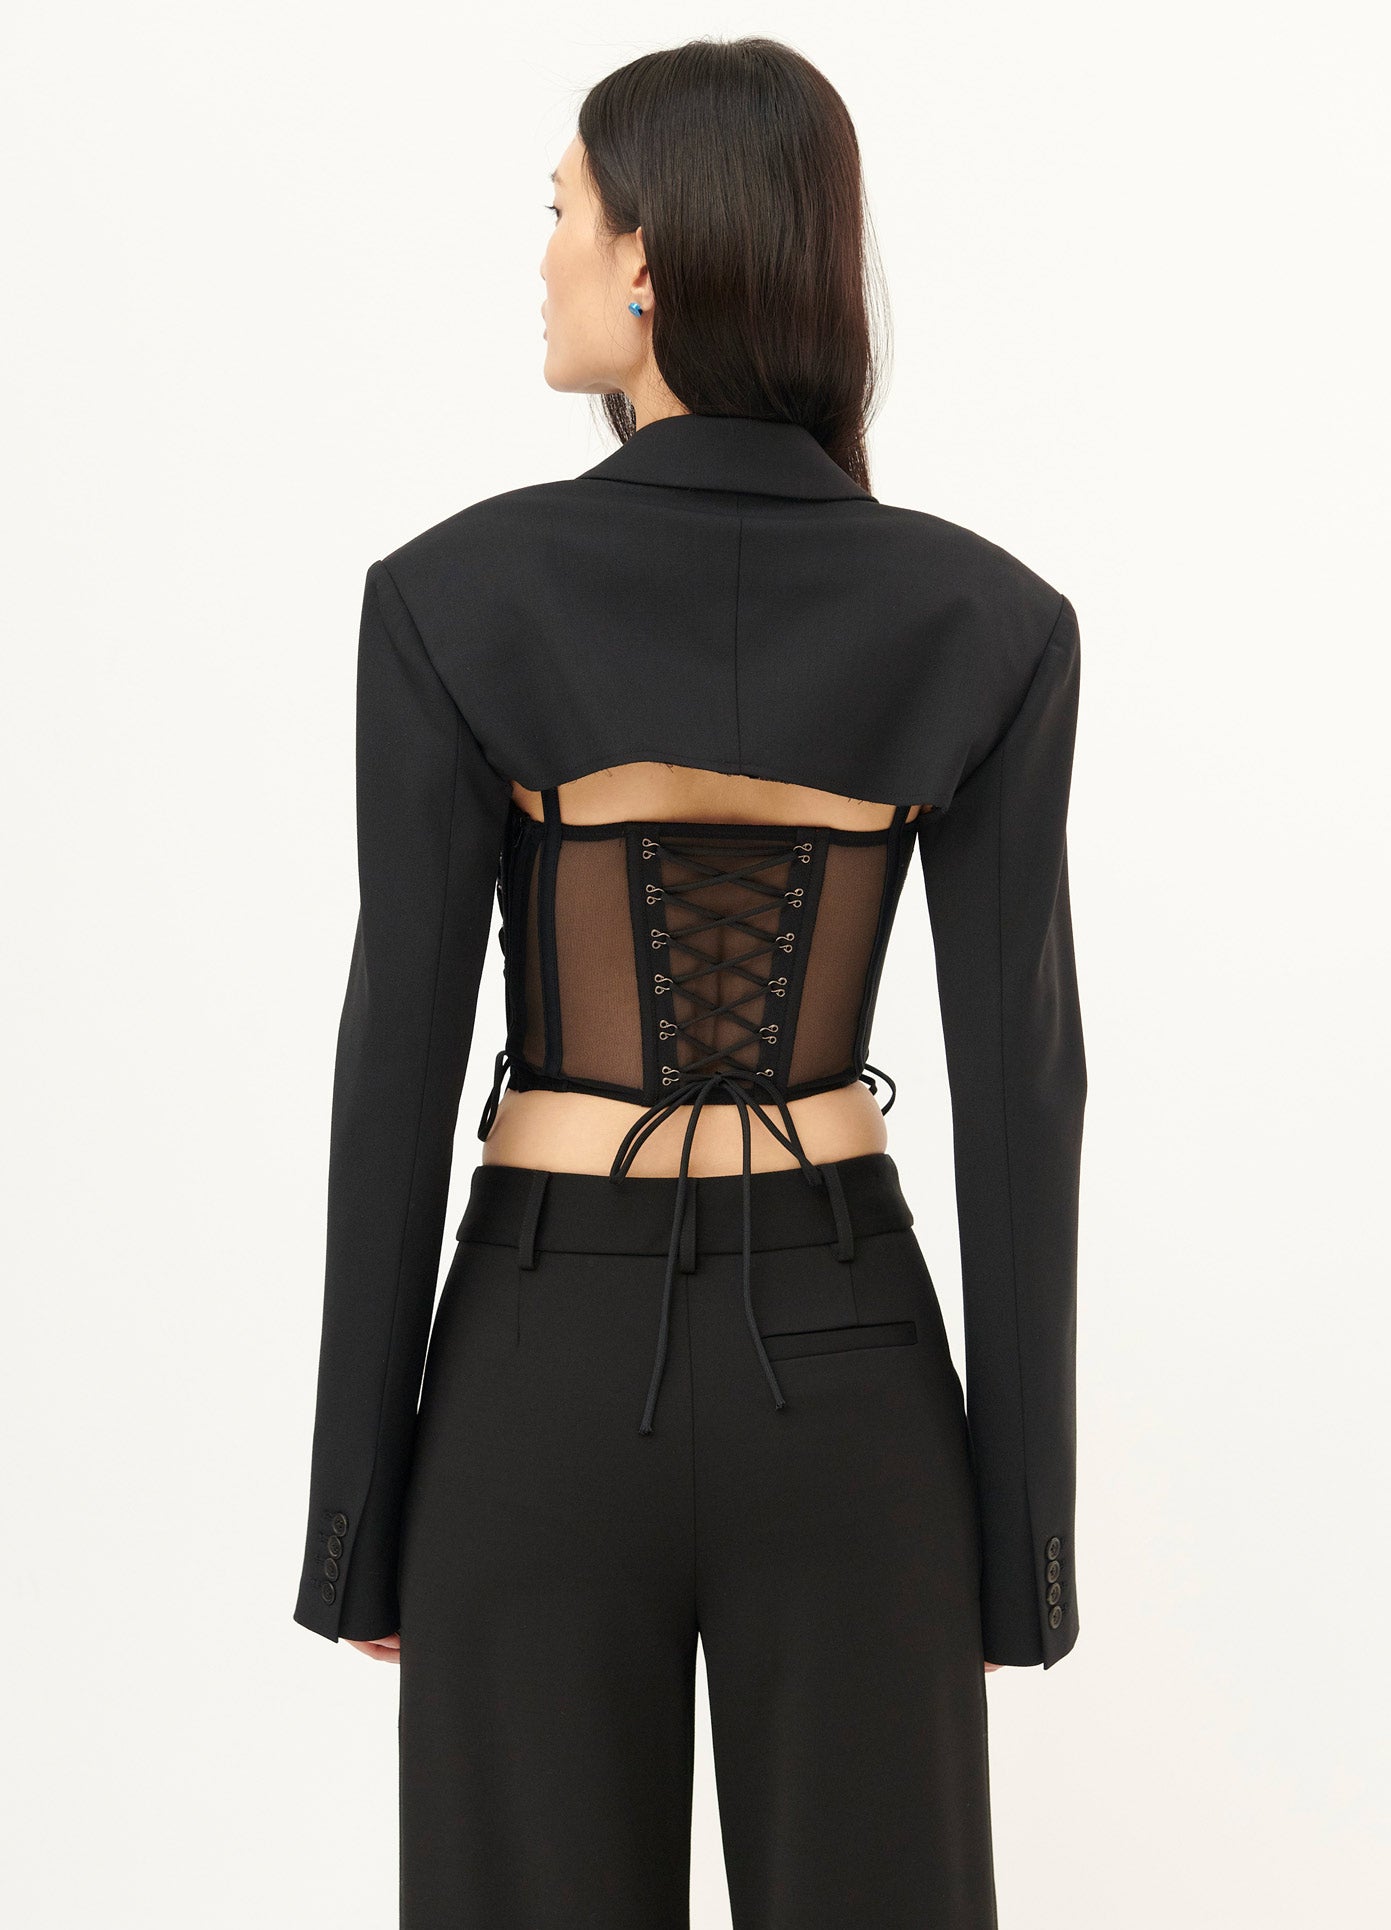 MONSE Cropped Jacket in Black on Model Back View